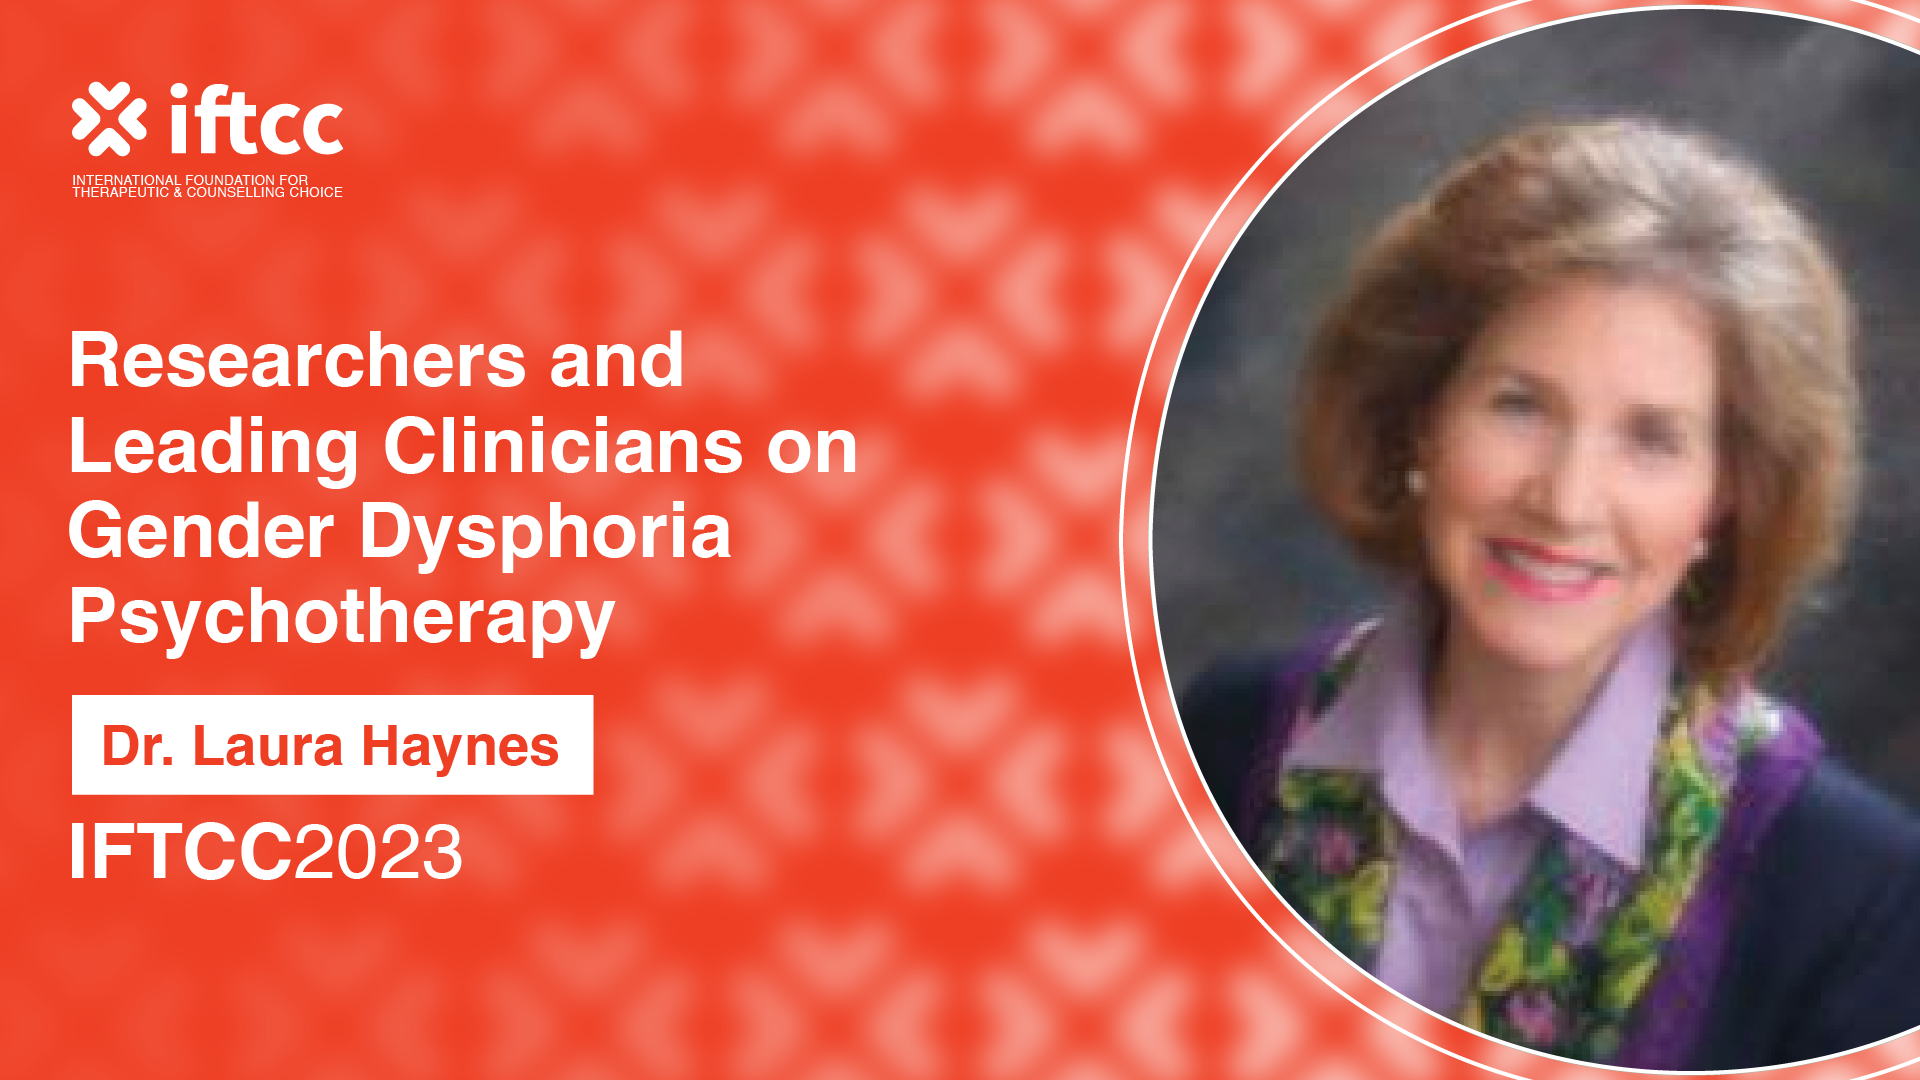 Session 4 – Researchers and Leading Clinicians on Gender Dysphoria Psychotherapy [S4-23-24]